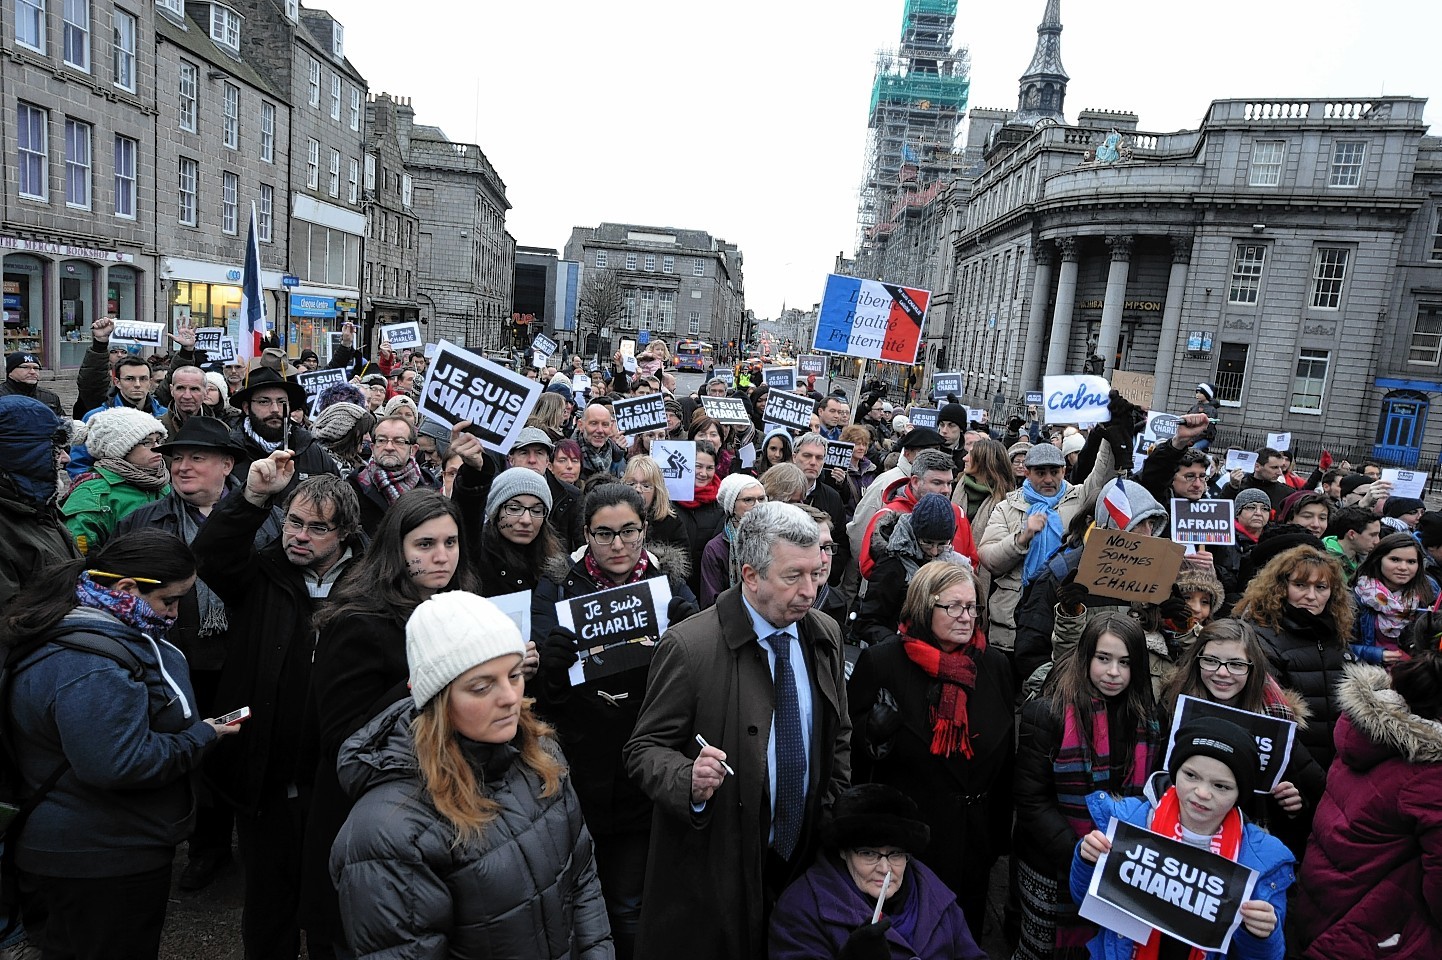 The Aberdeen rally in support of Paris